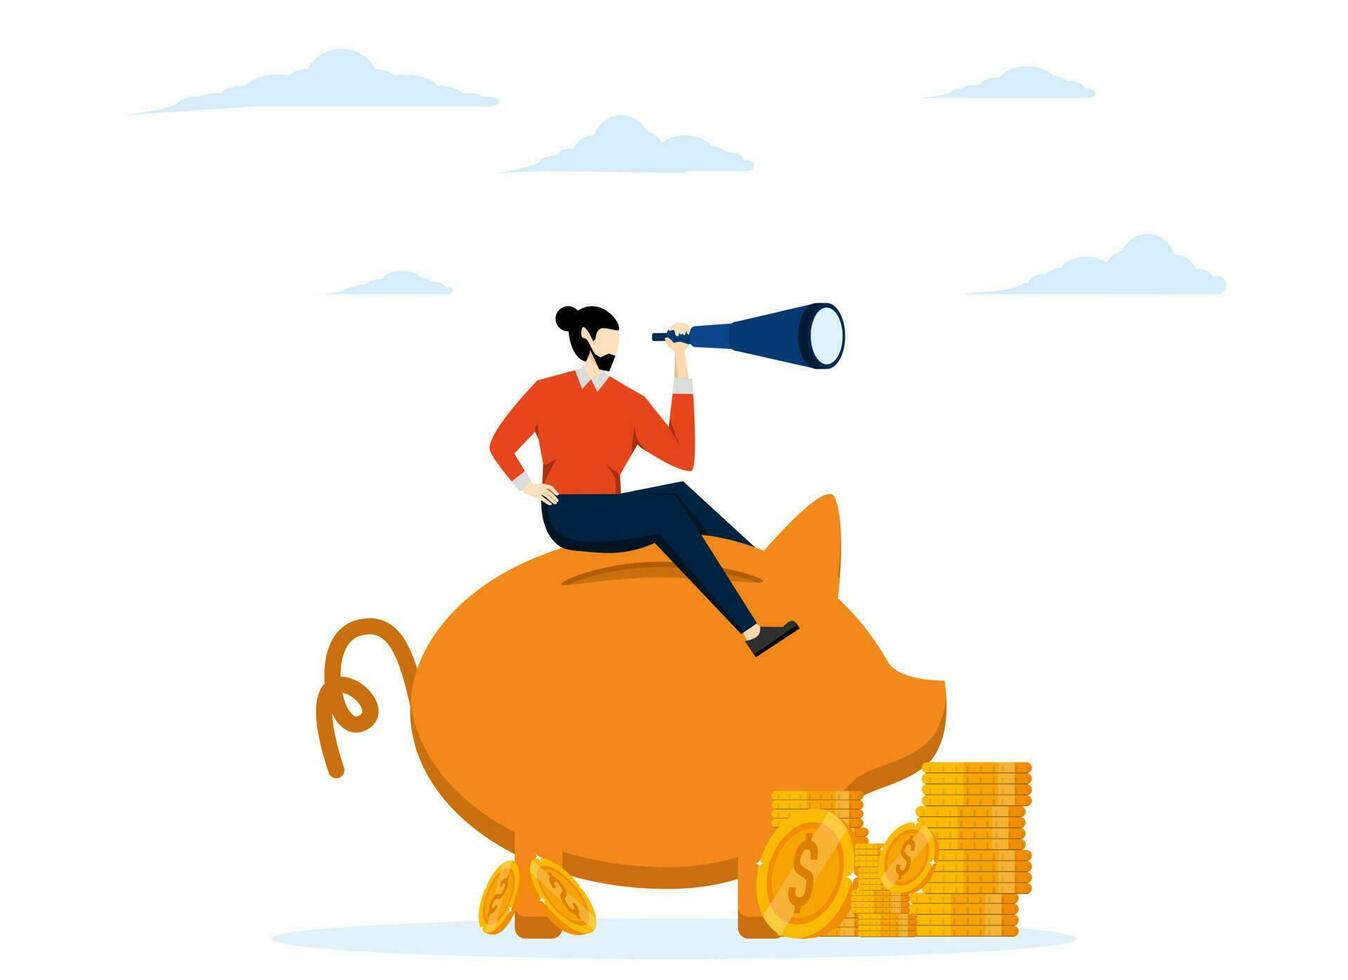 Financial future, wealth management or savings concept, stock market mutual fund or pension fund, find investment opportunity, businessman riding piggy bank looking through binoculars to see future. vector